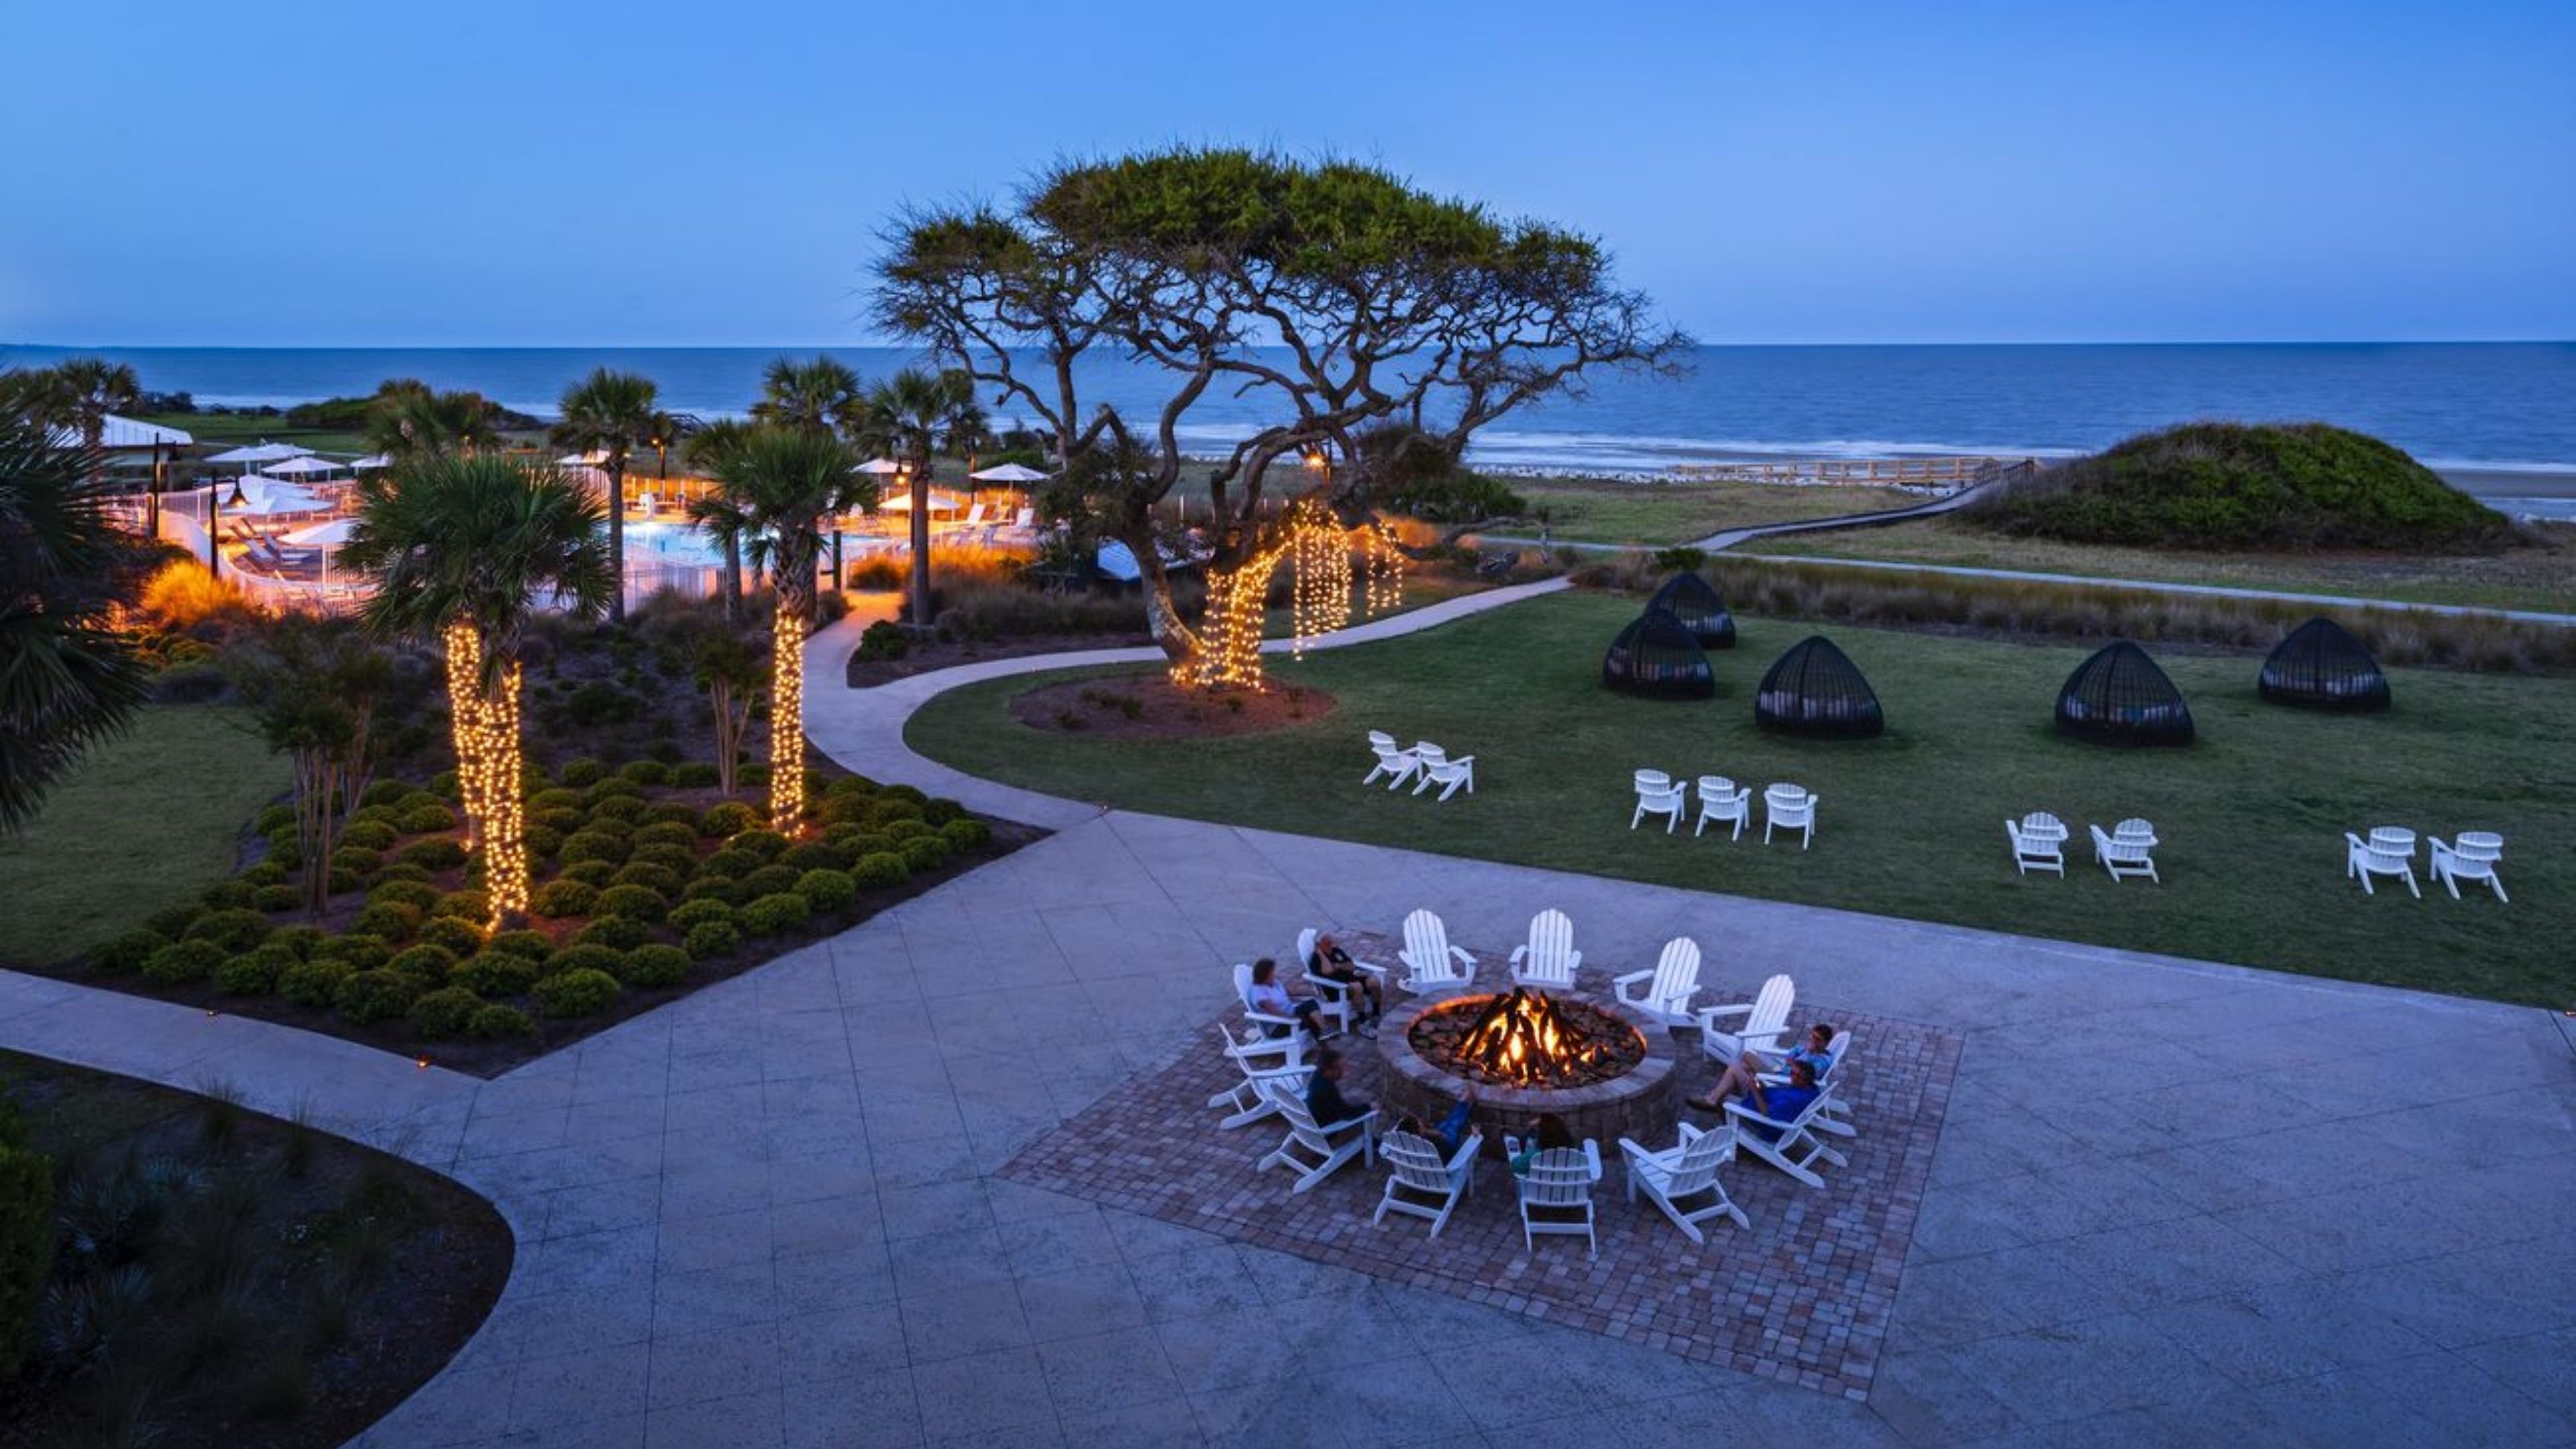 Enjoy our firepits and cabanas day or night!